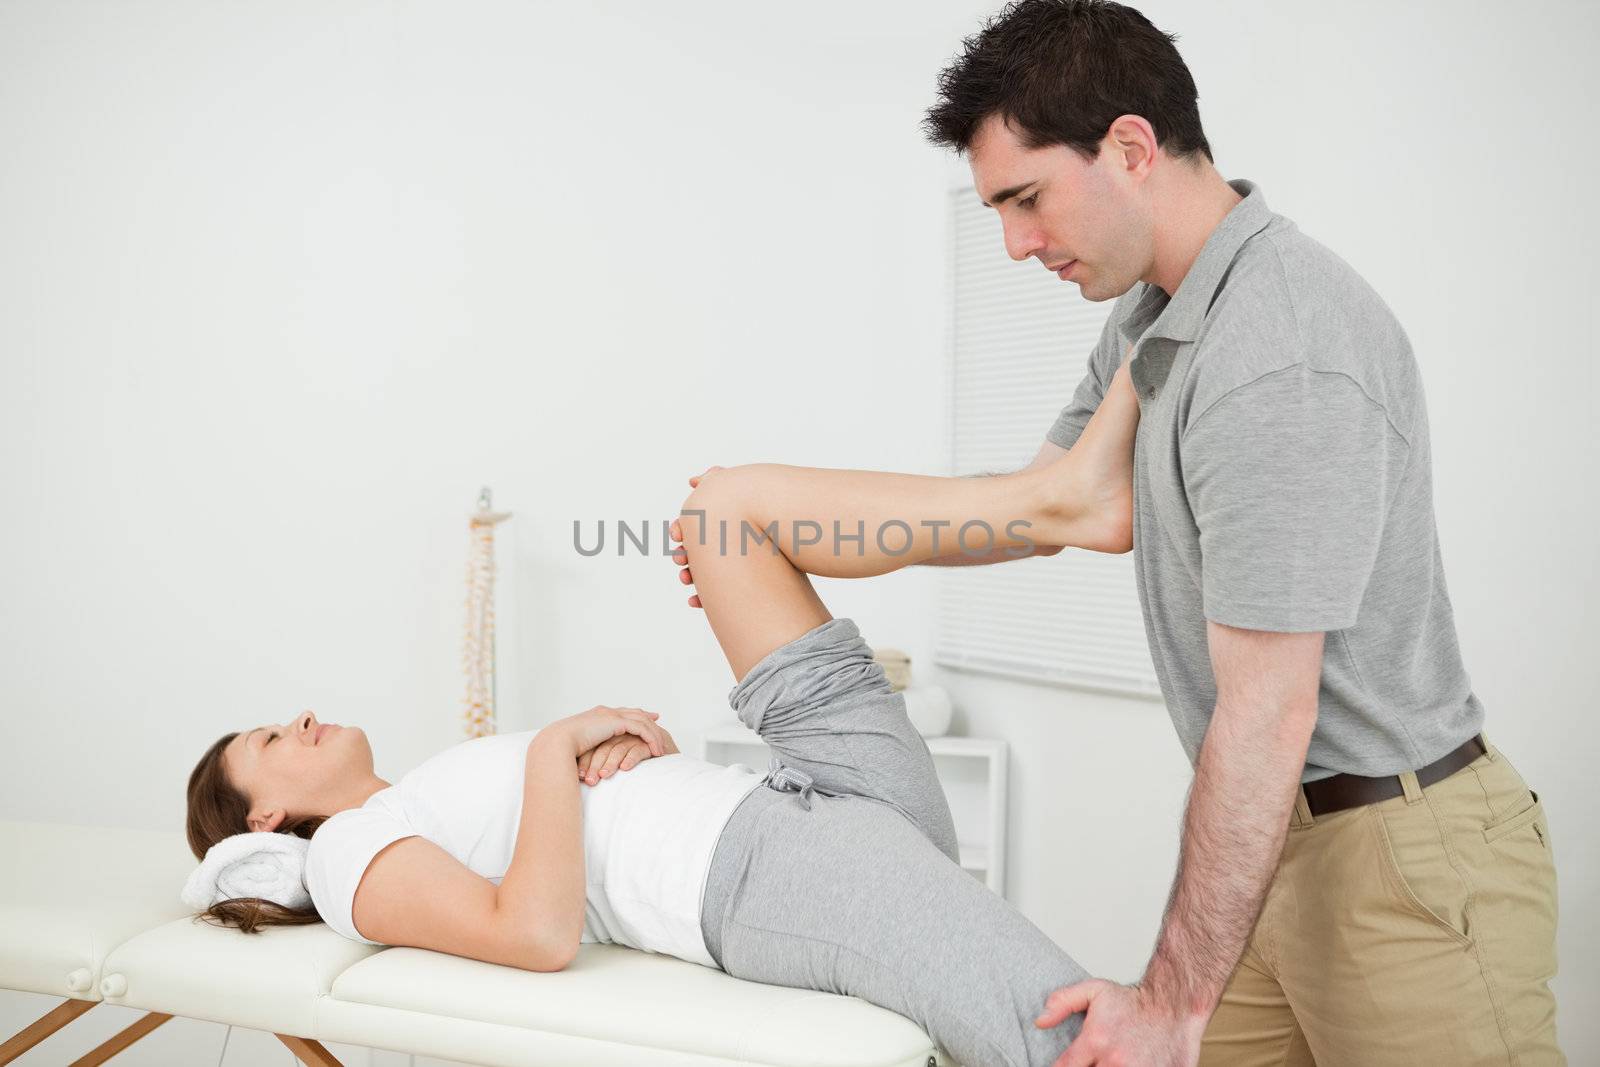 Chiropractor stretching the legs of his patient while standing in a medical room